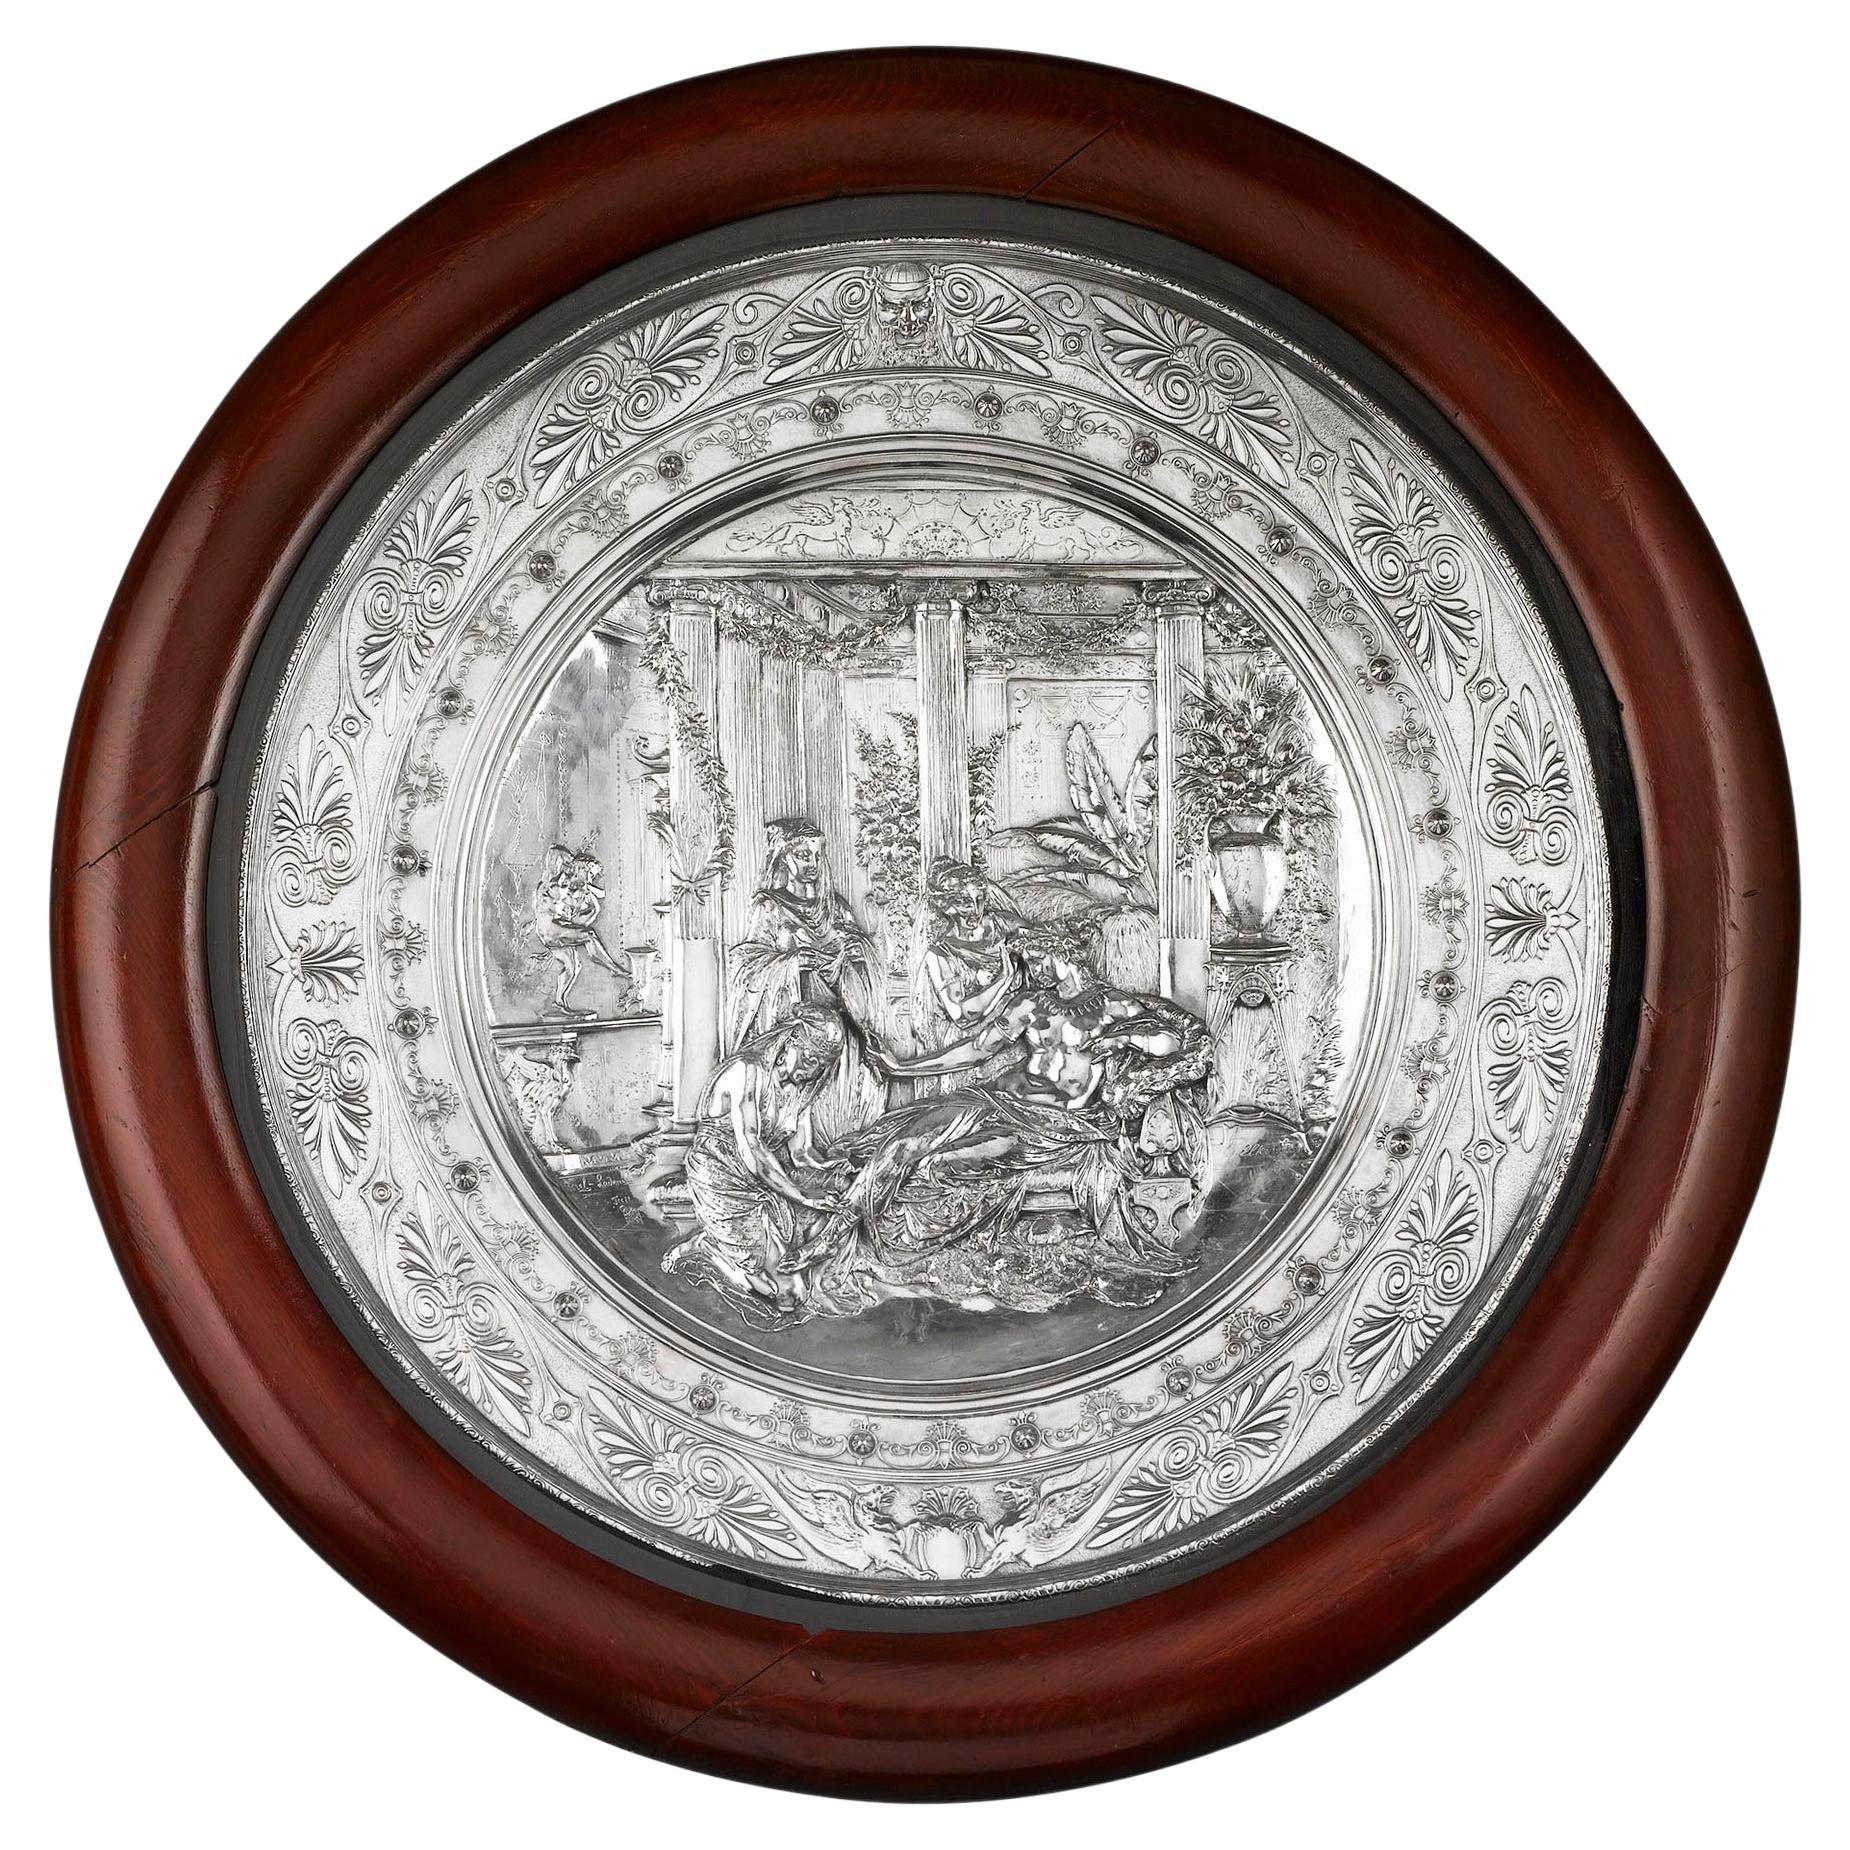 Elkington & Co. Silverplate Charger by Morel-Ladeuil